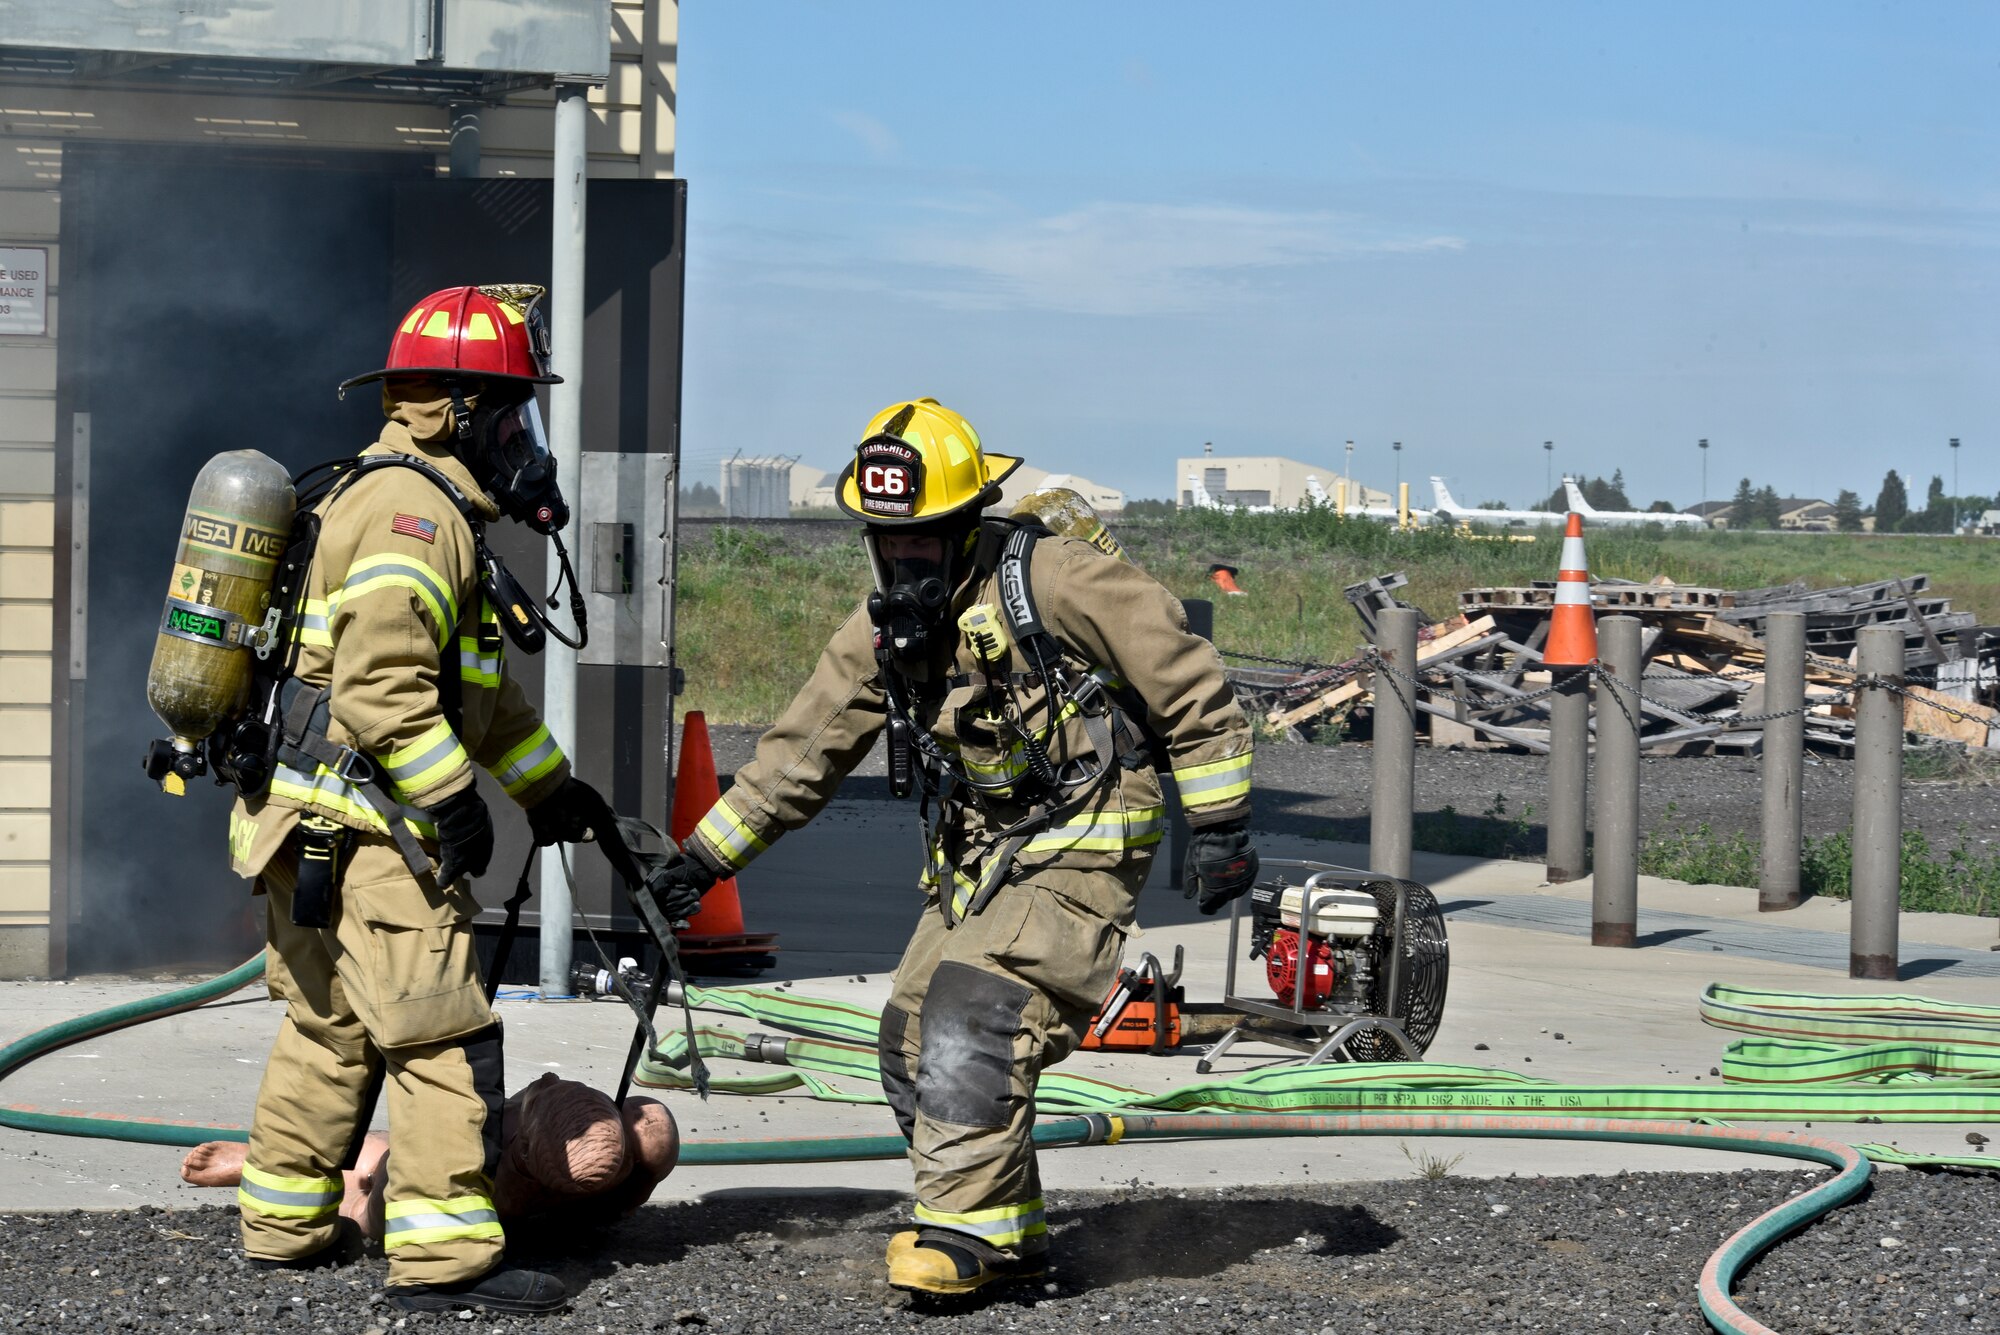 92nd Civil Engineer Squadron firefighters pull out a mannequin from the simulated structure fire during a training exercise May 11, 2016, at Fairchild Air Force Base, Wash. During the exercise the firefighters reacted to a structure fire and simulated the rescue of two victims. (U.S. Air Force photo/Airman 1st Class Taylor Bourgeous)